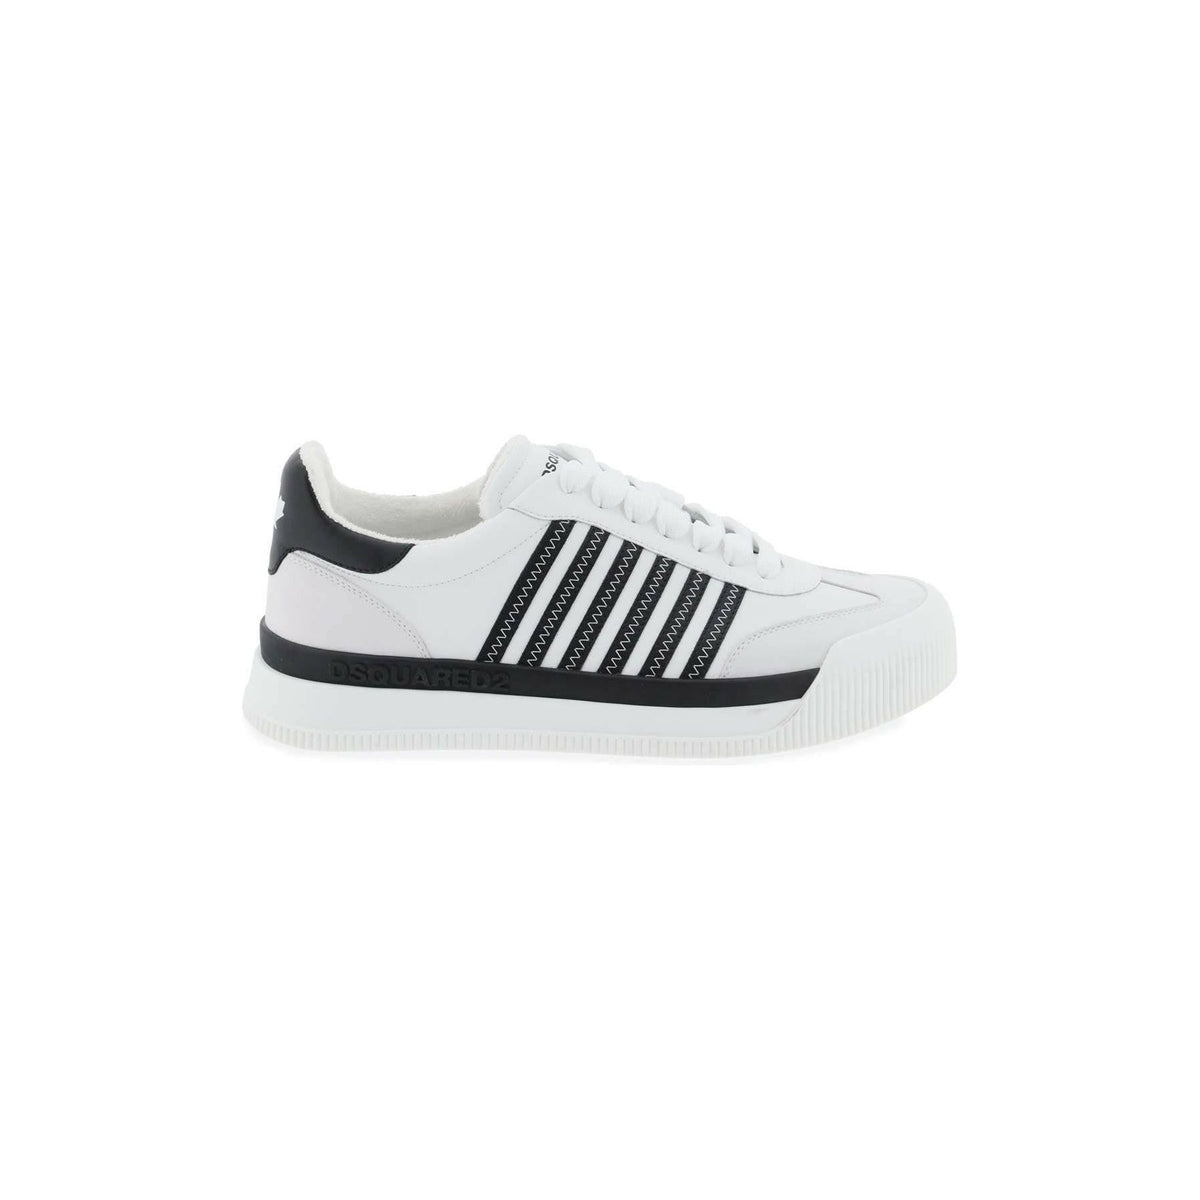 DSQUARED2 - White Black Leather New Jersey Sneakers With Contrasting Stripes - JOHN JULIA